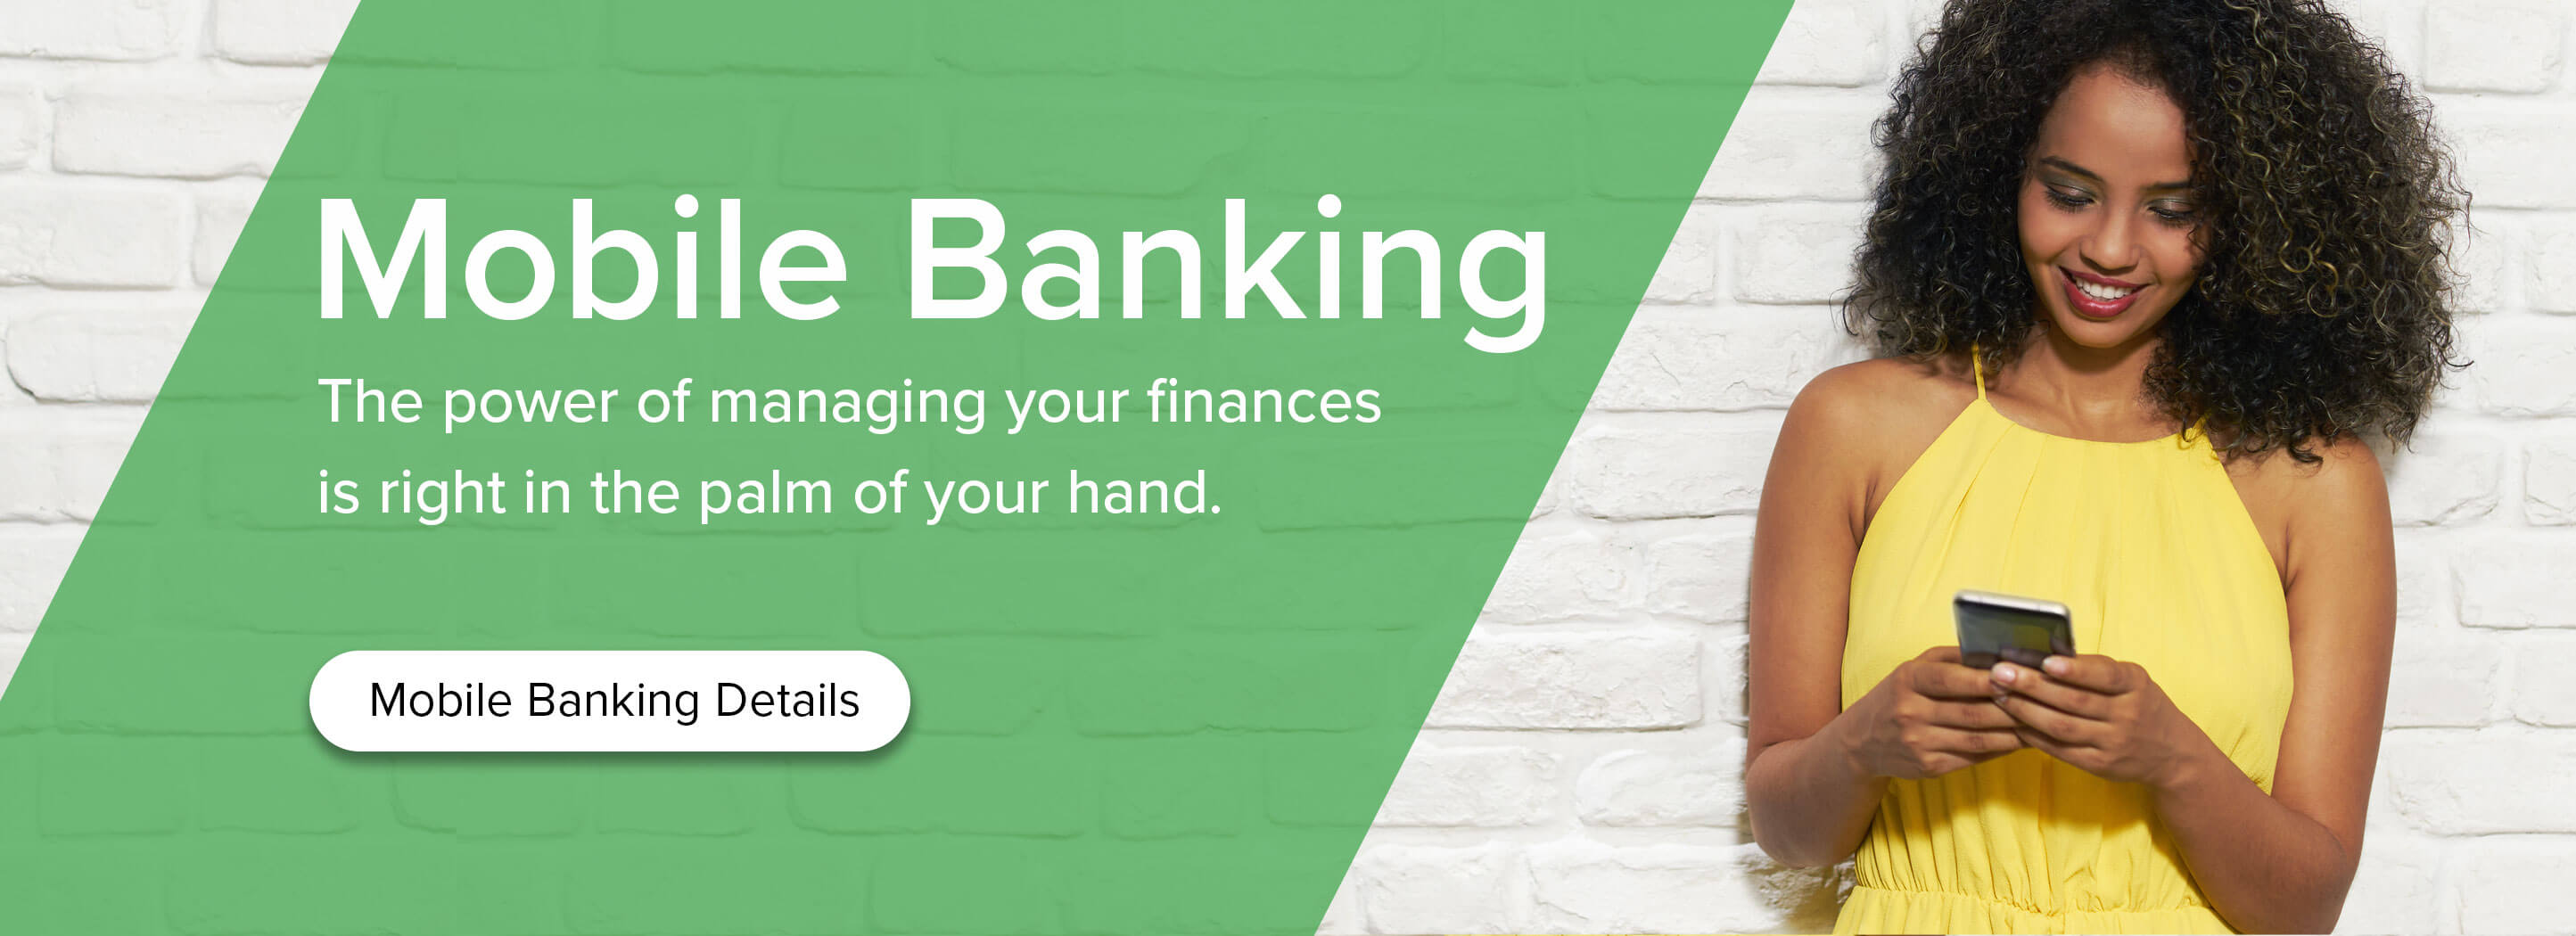 Mobile Banking. The power of managing your financing is right in the palm of your hand. Mobile Banking Details